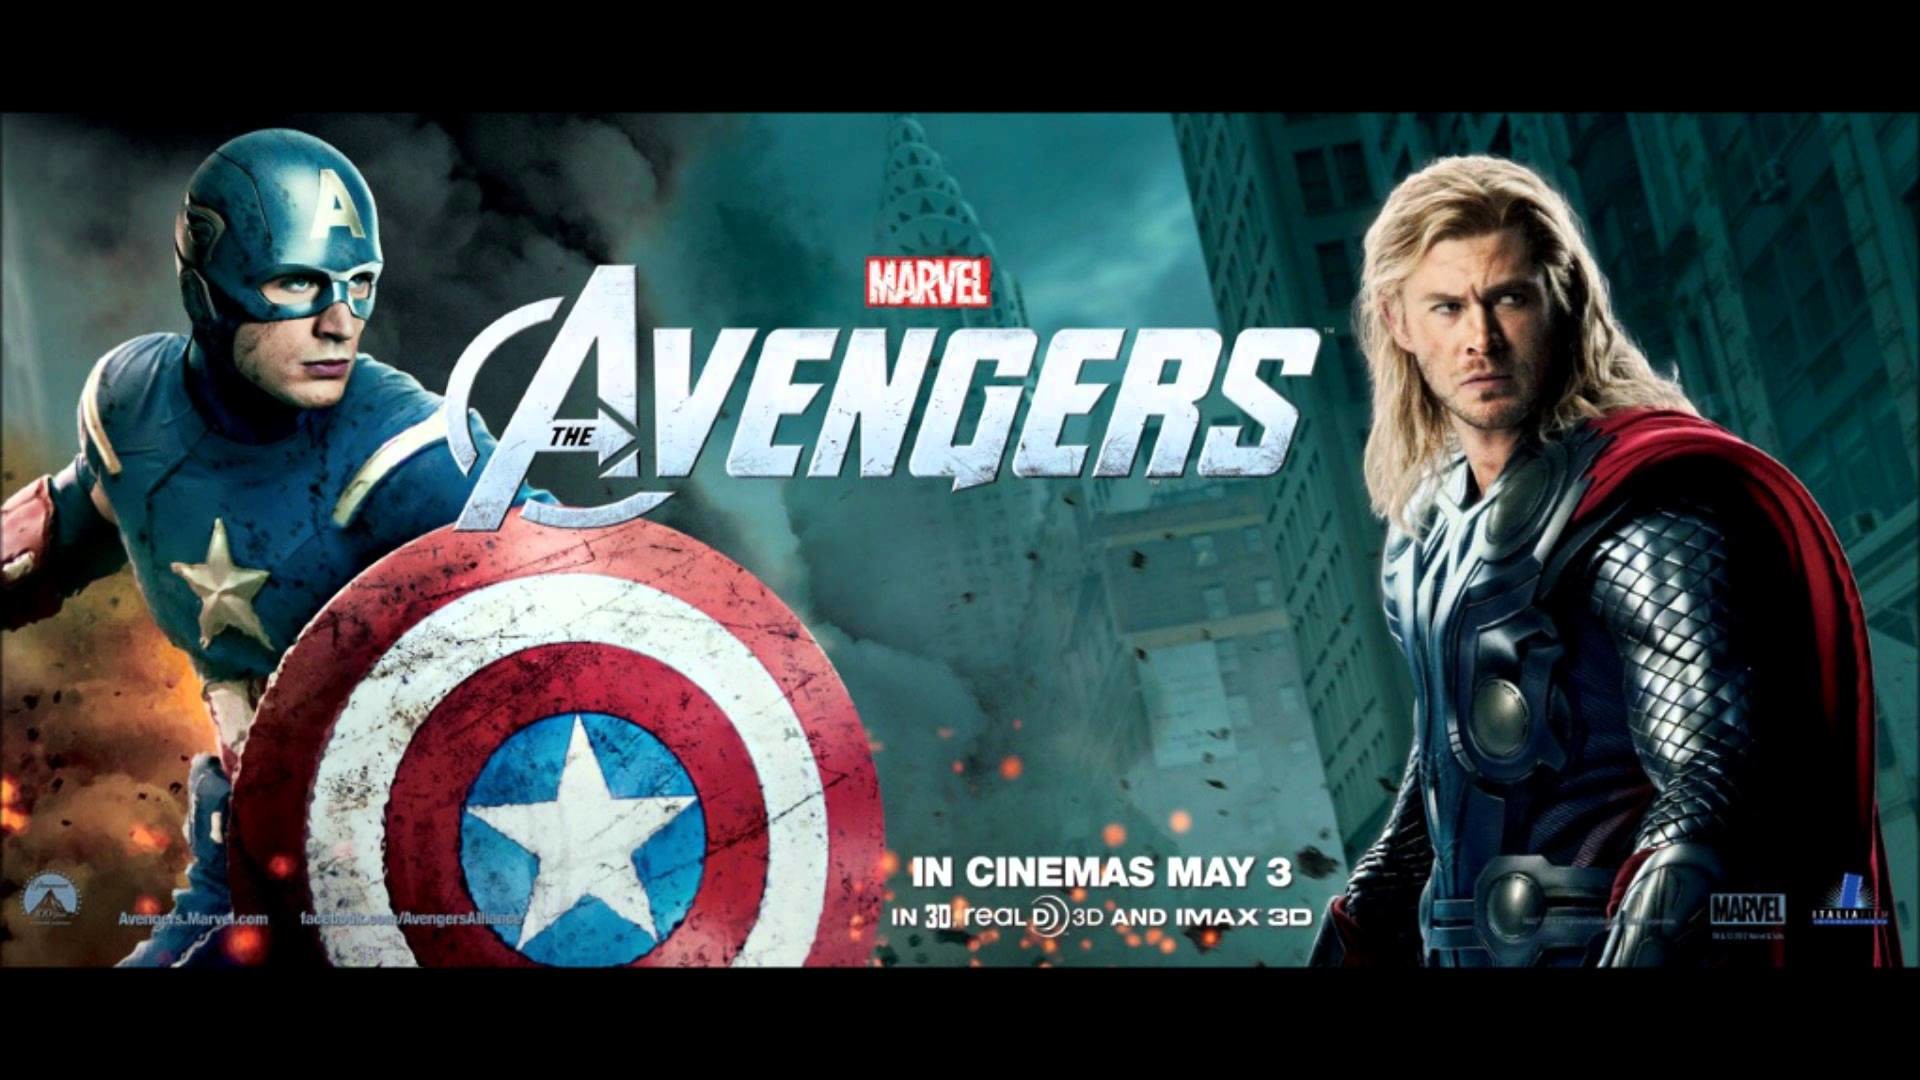 Marvel's The Avengers HD Posters & Wallpaper in 1080p